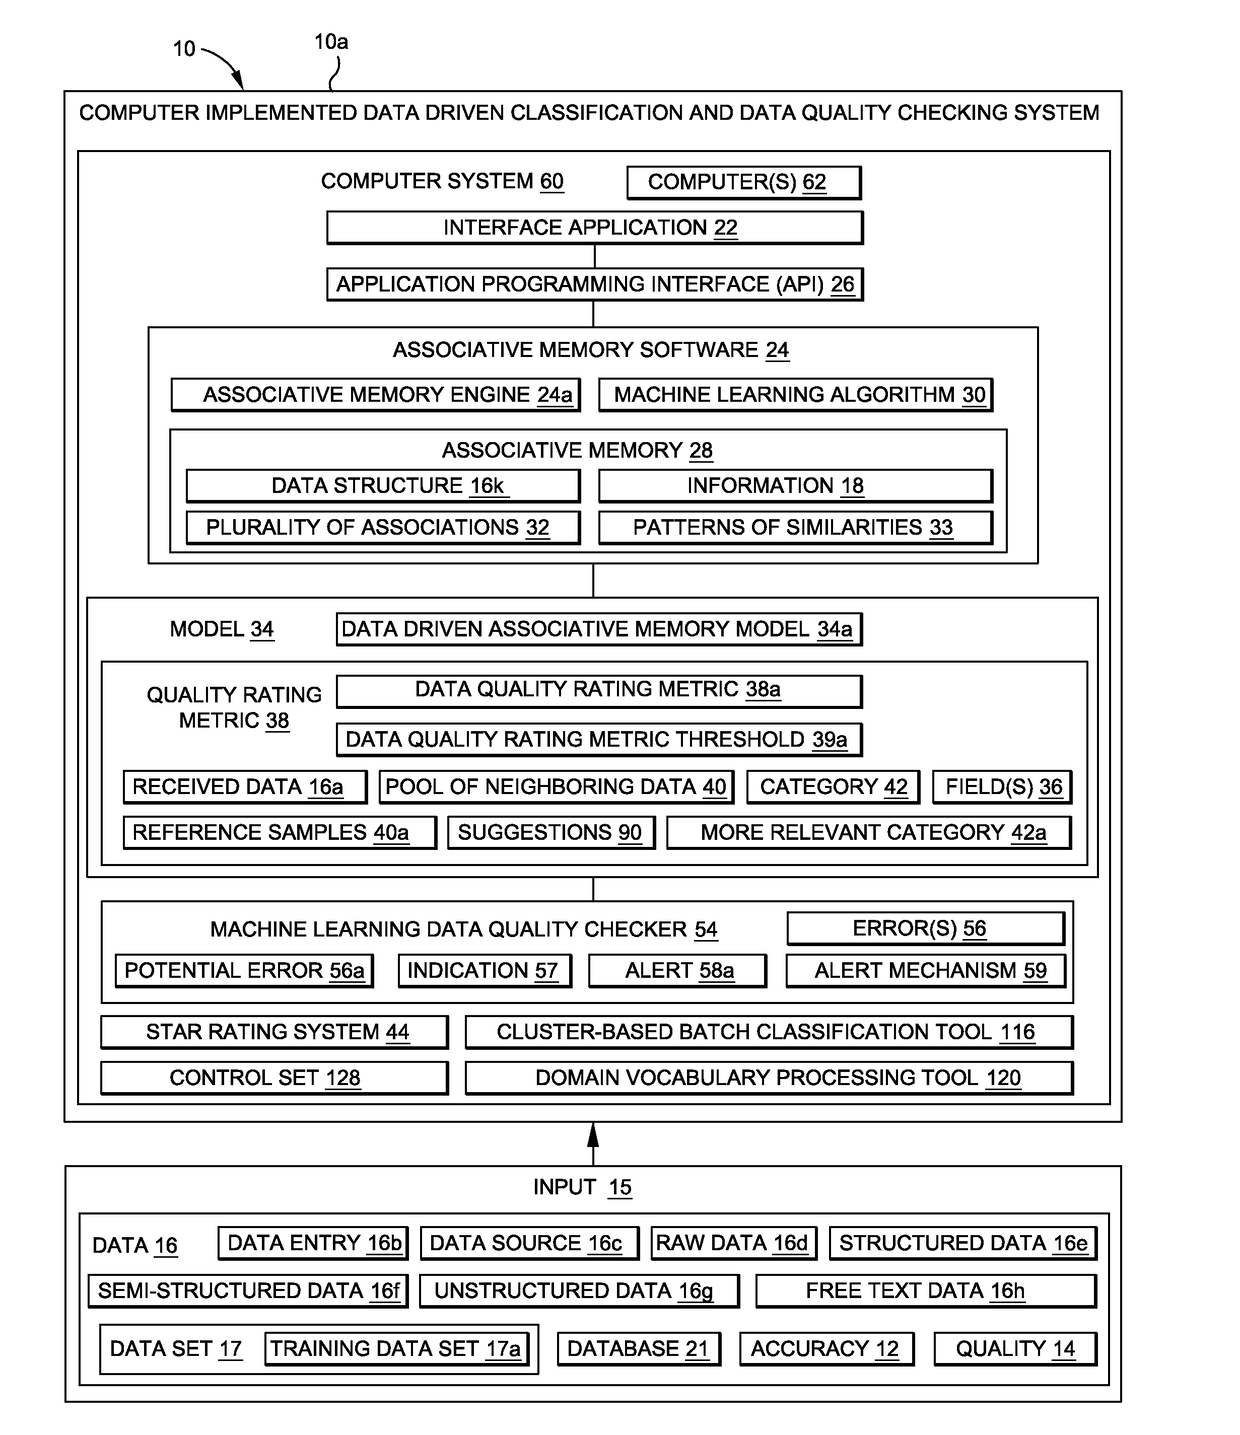 Data driven classification and data quality checking method